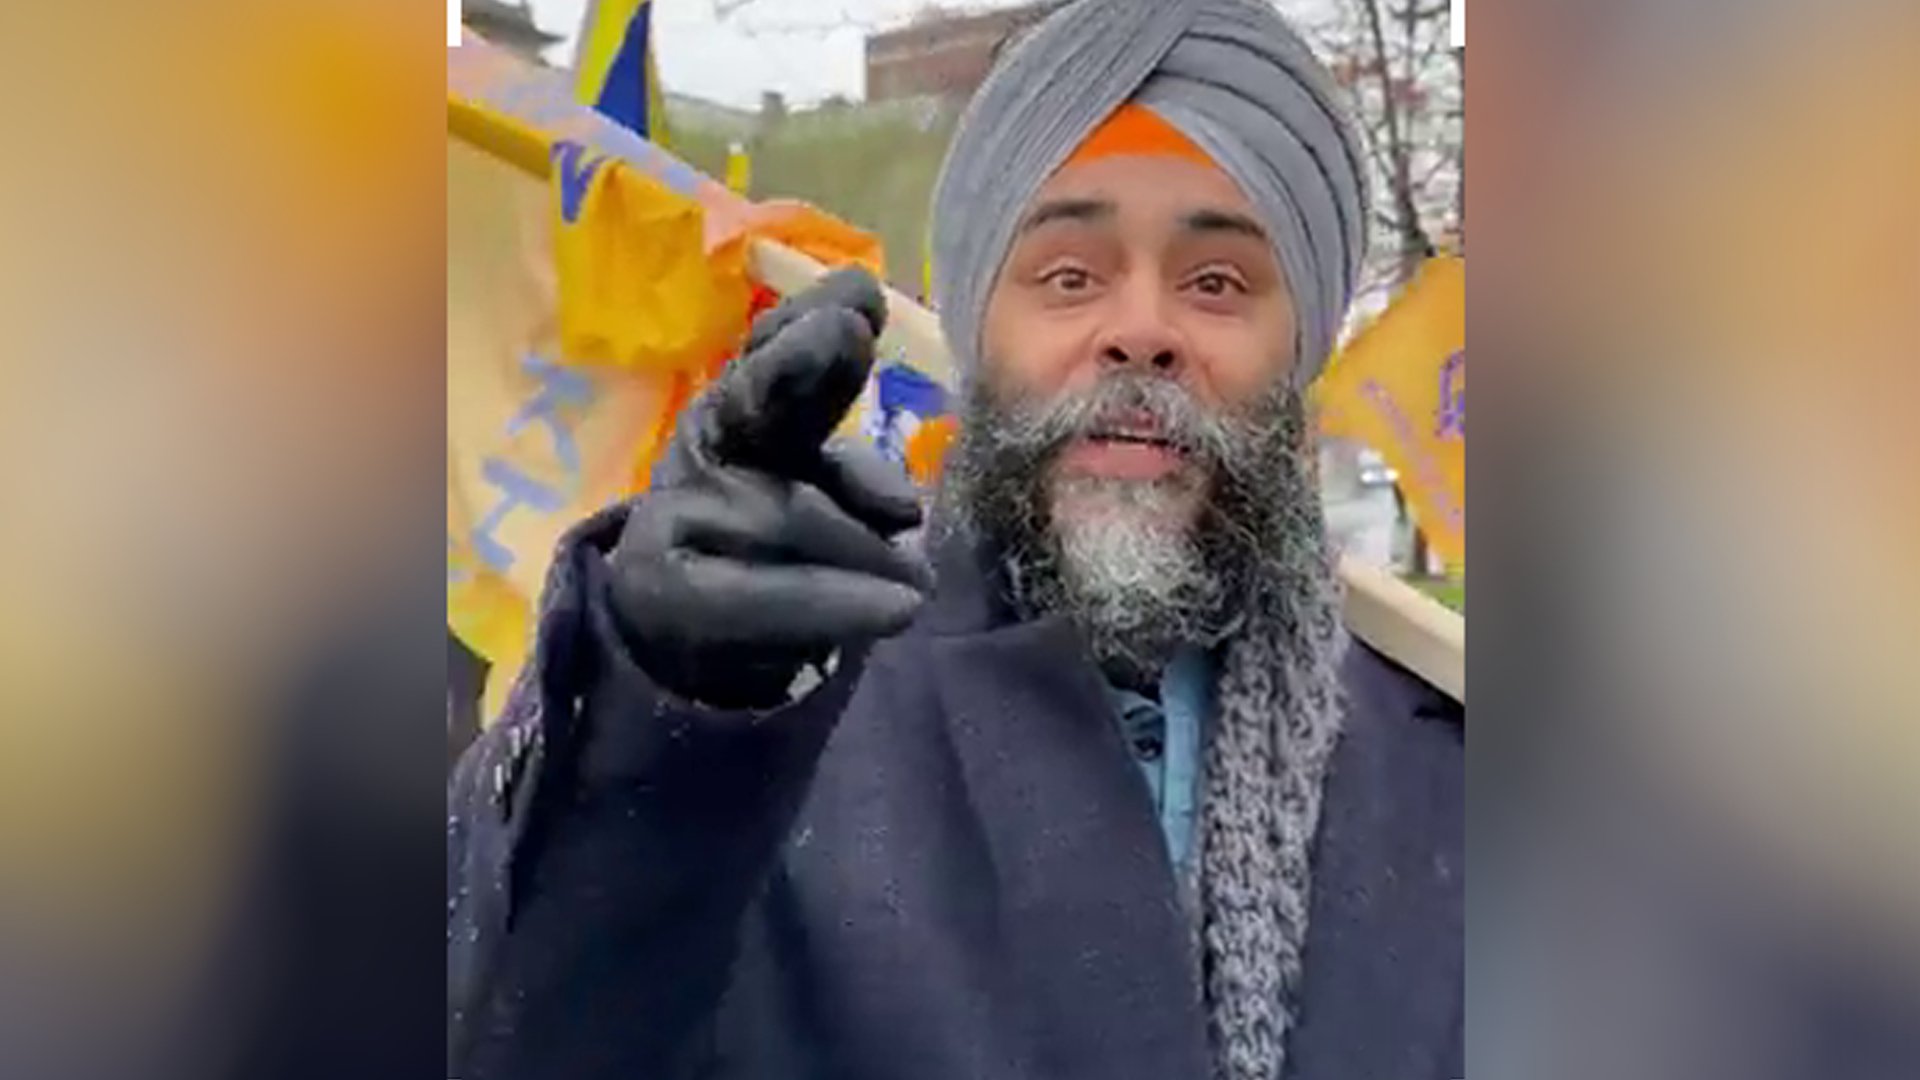 Economic Times - Watch: Indian journalist attacked, abused by Khalistani supporters near Indian embassy in Washington